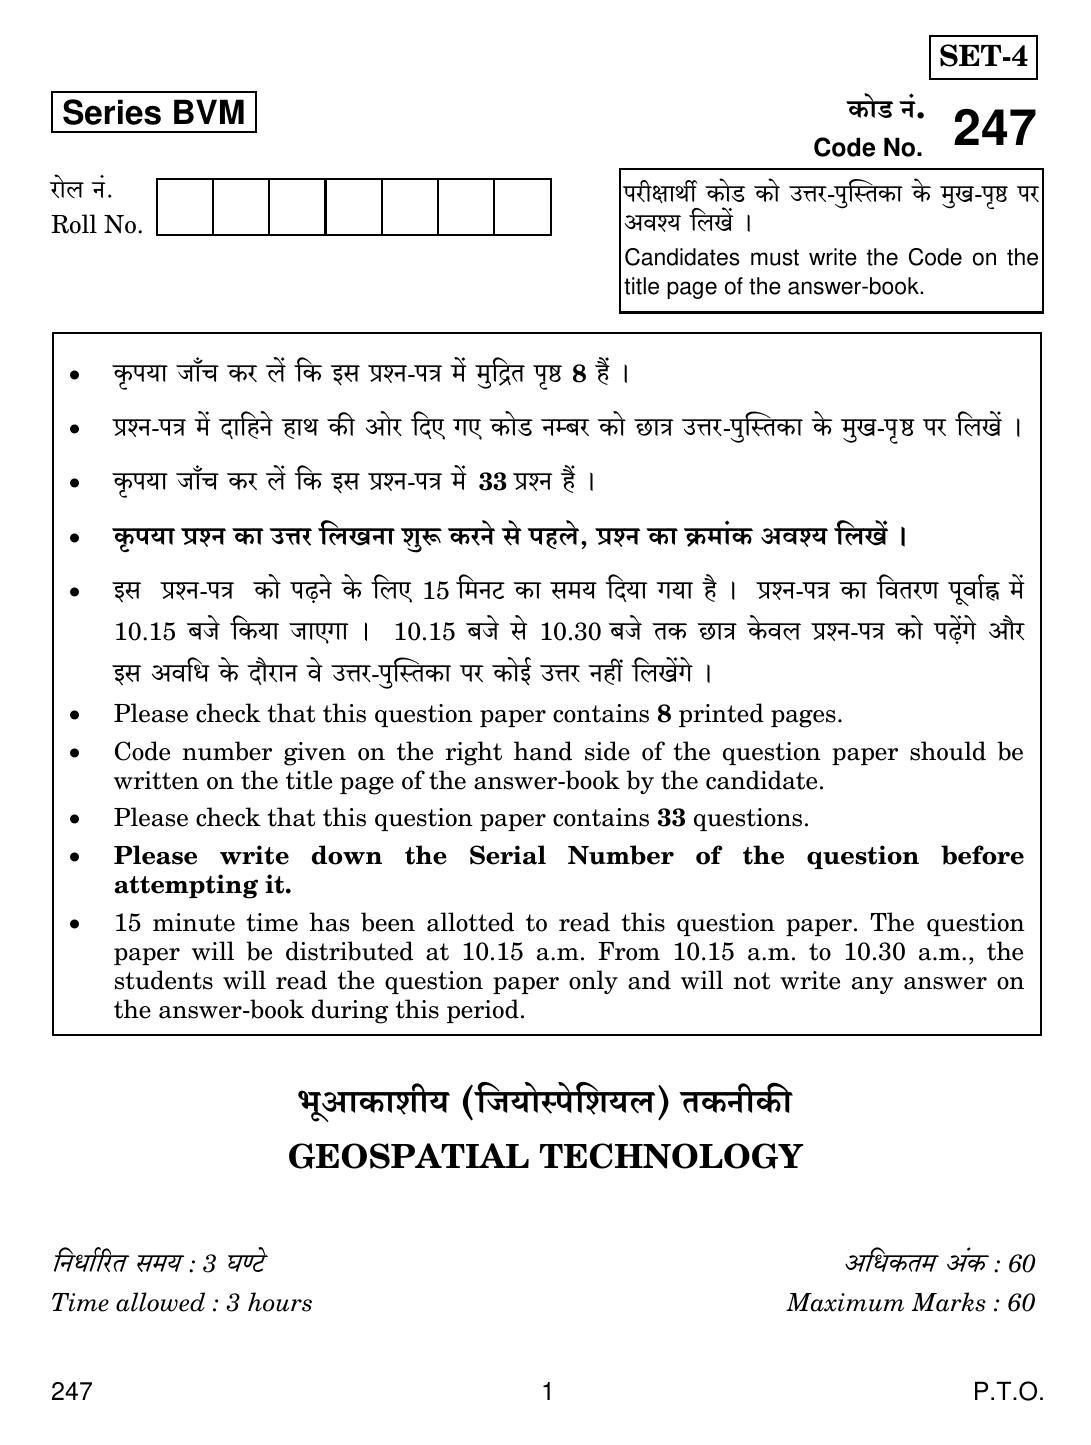 CBSE Class 12 247 Geospatial Technology 2019 Question Paper - Page 1